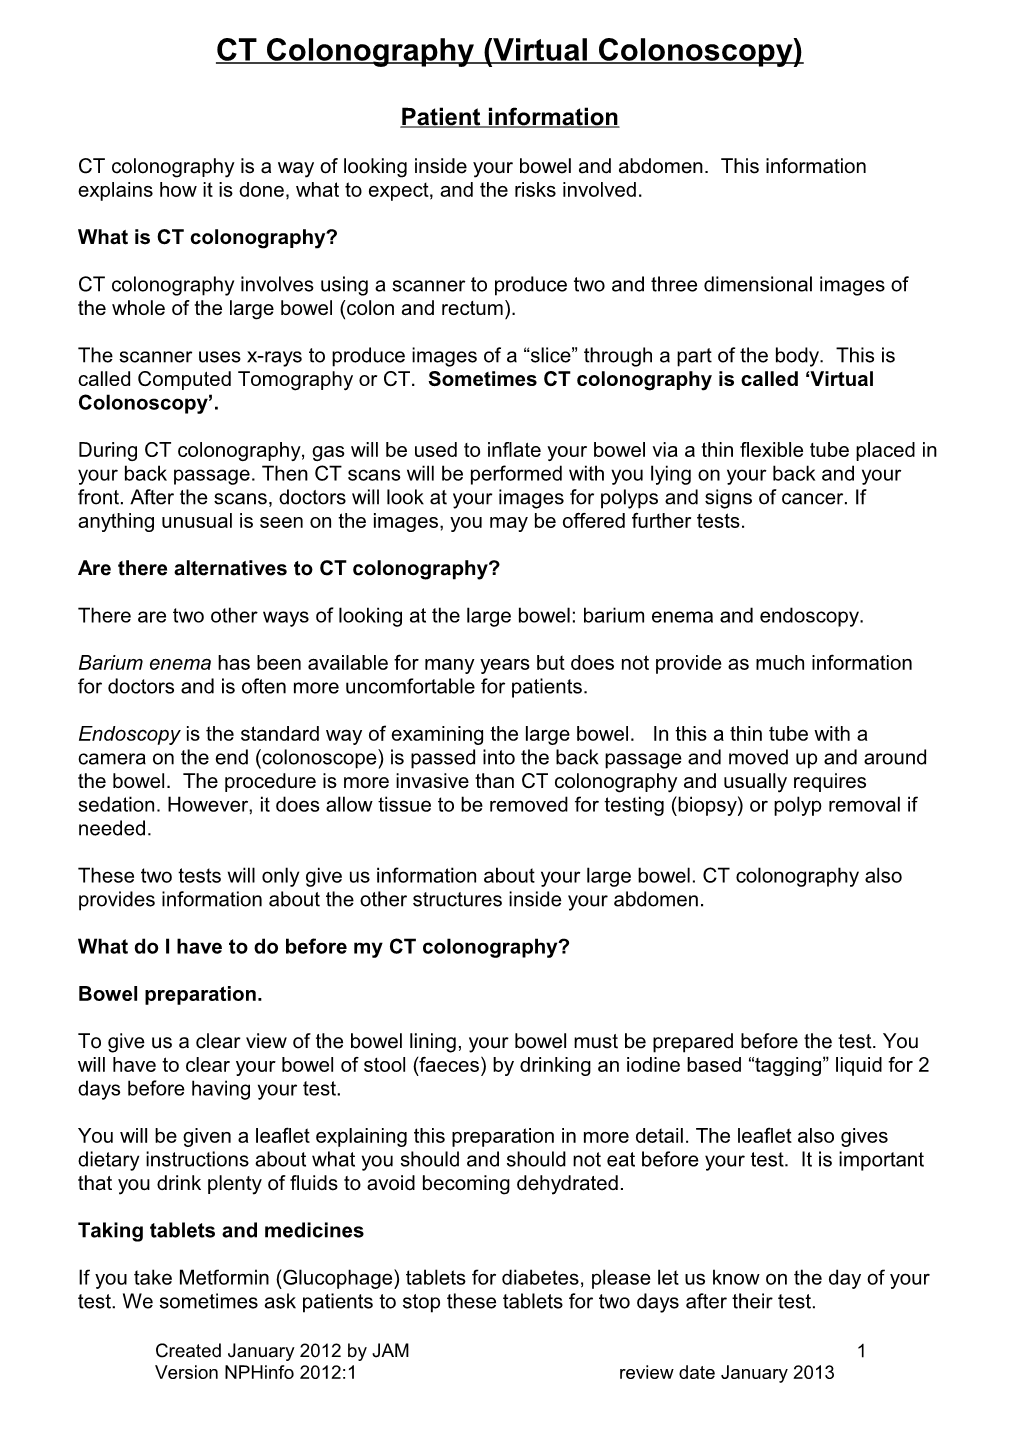 Example of Ct Colonography Patient Information